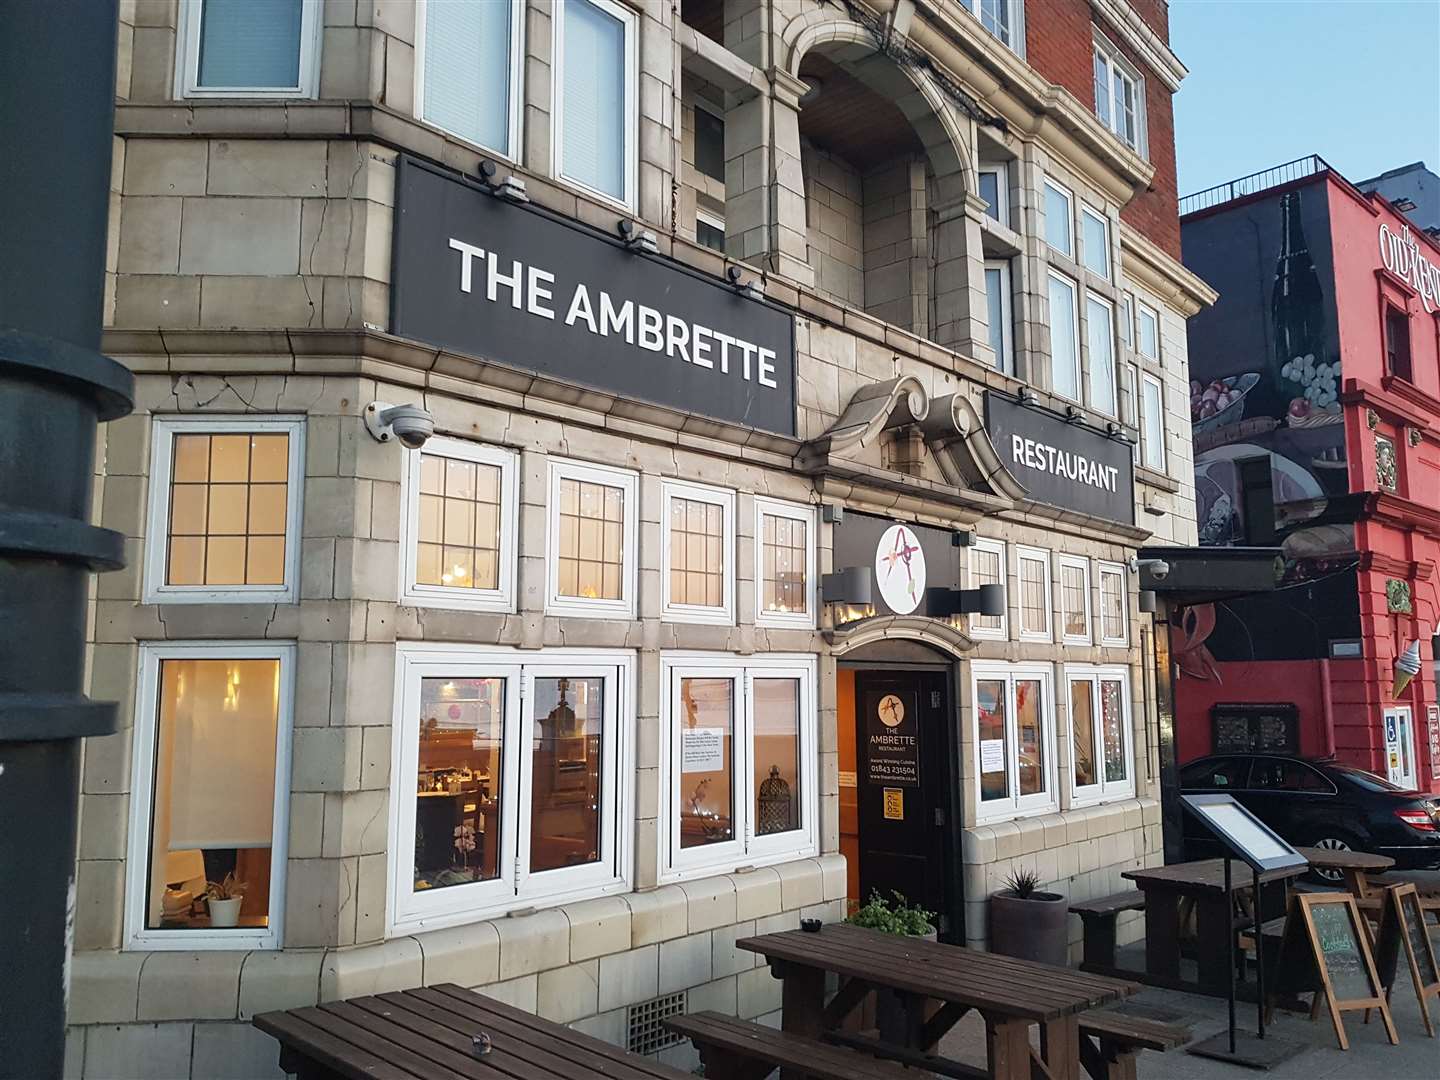 The Ambrette restaurant in Margate was closed earlier this year